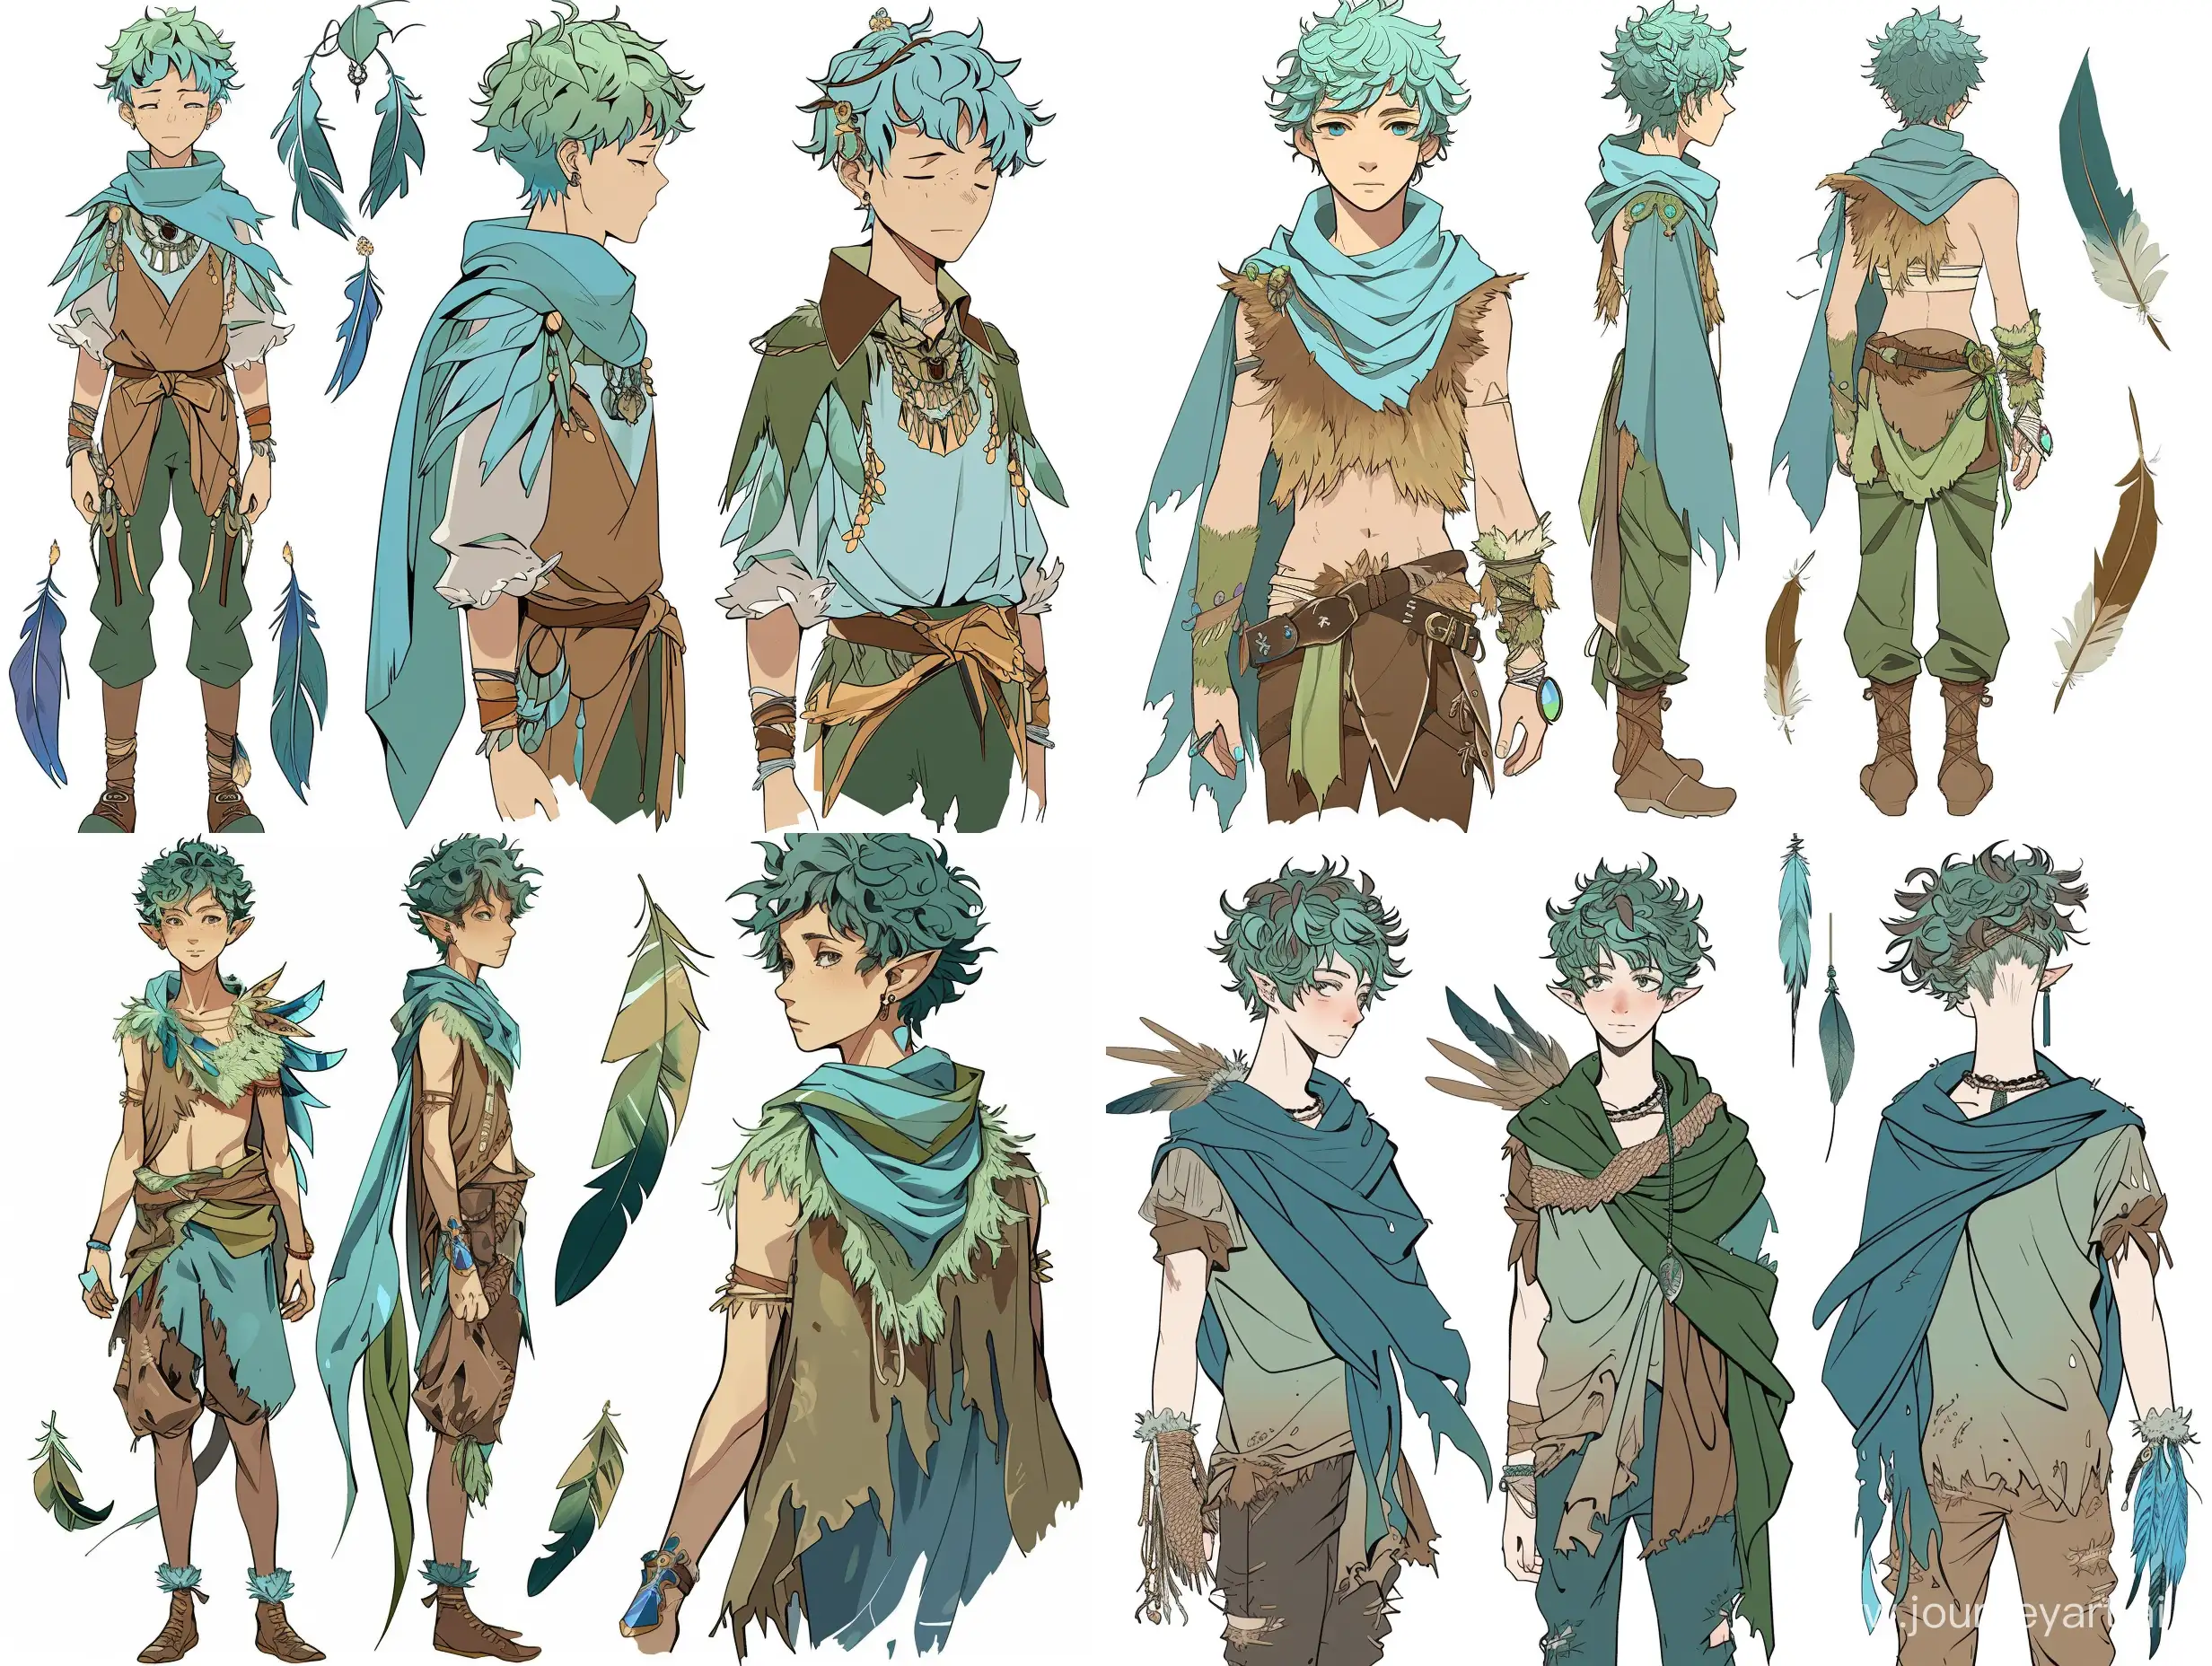 SoftNatured-Anime-Character-with-Tousled-Blue-and-Green-Hair-in-Comfortable-Everyday-Wear